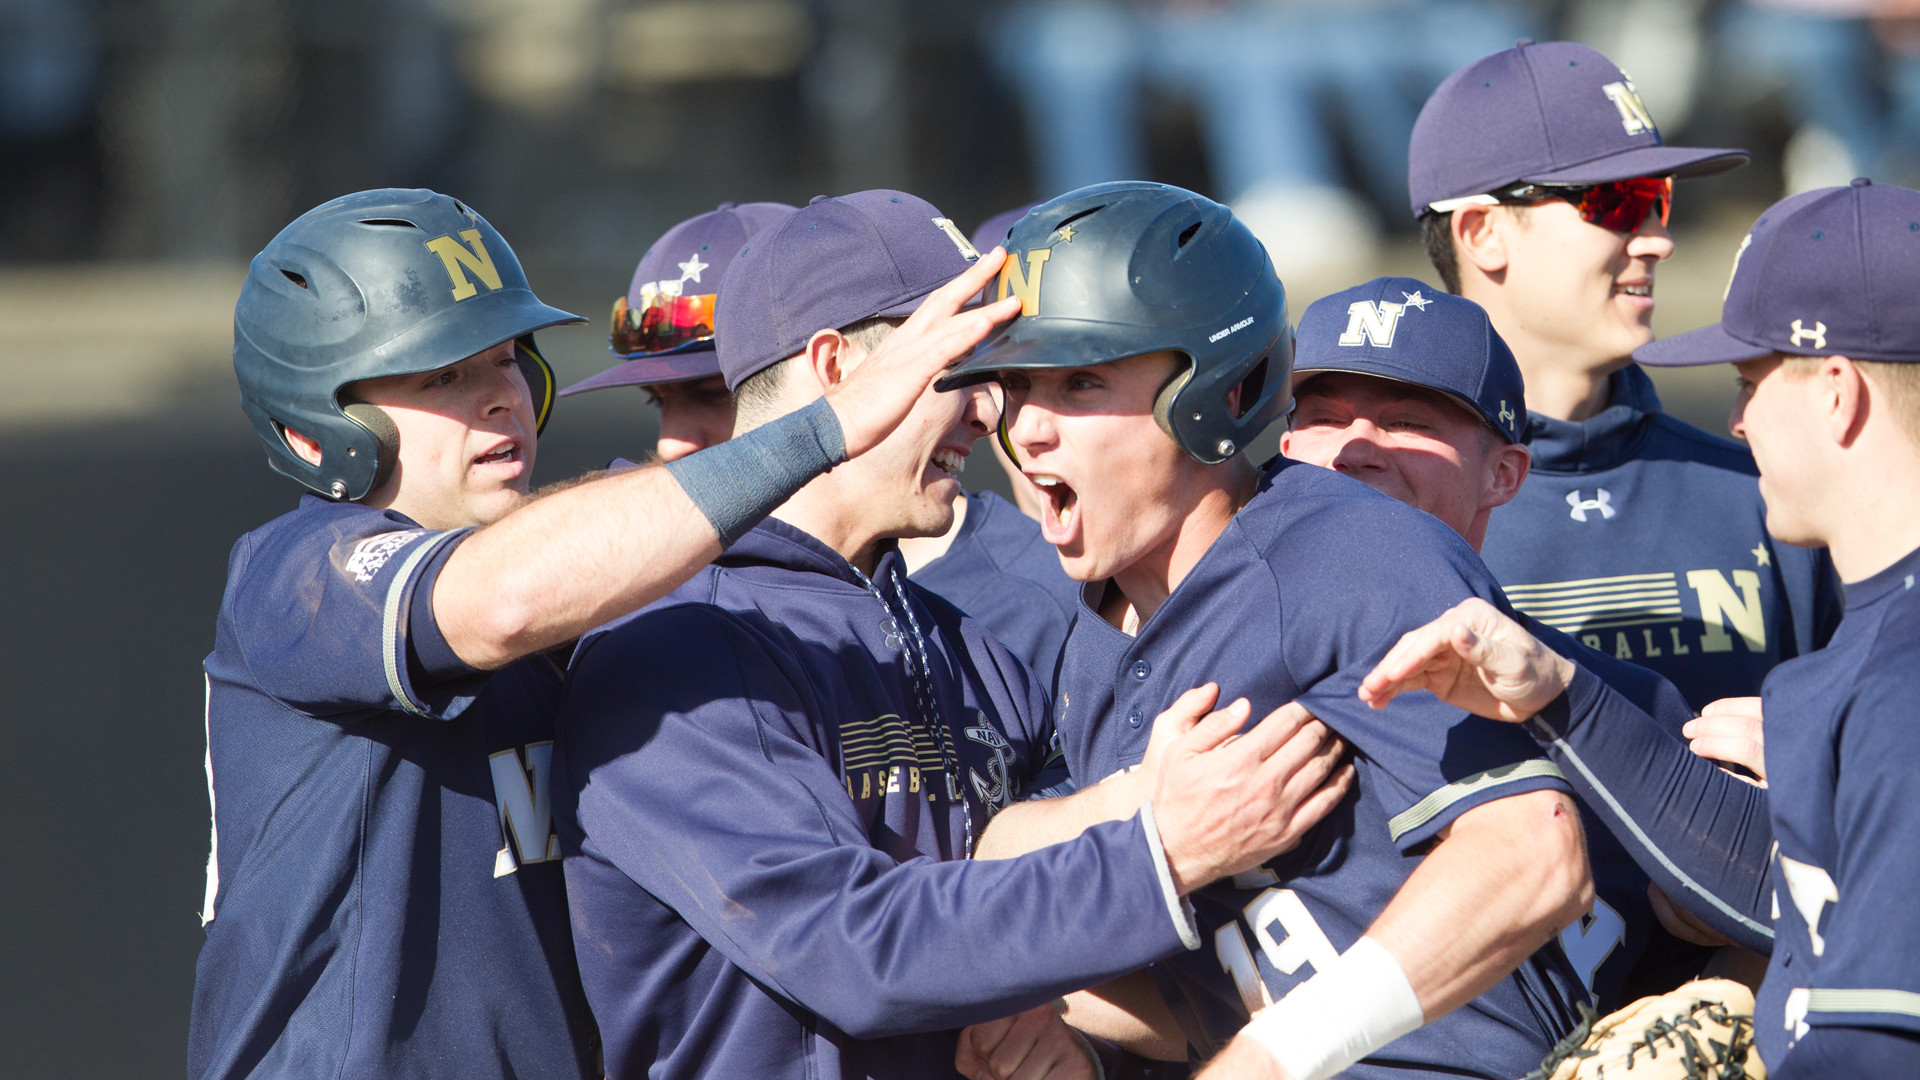 Navy Wins Baseball Star and Doubleheader - Army Navy Game